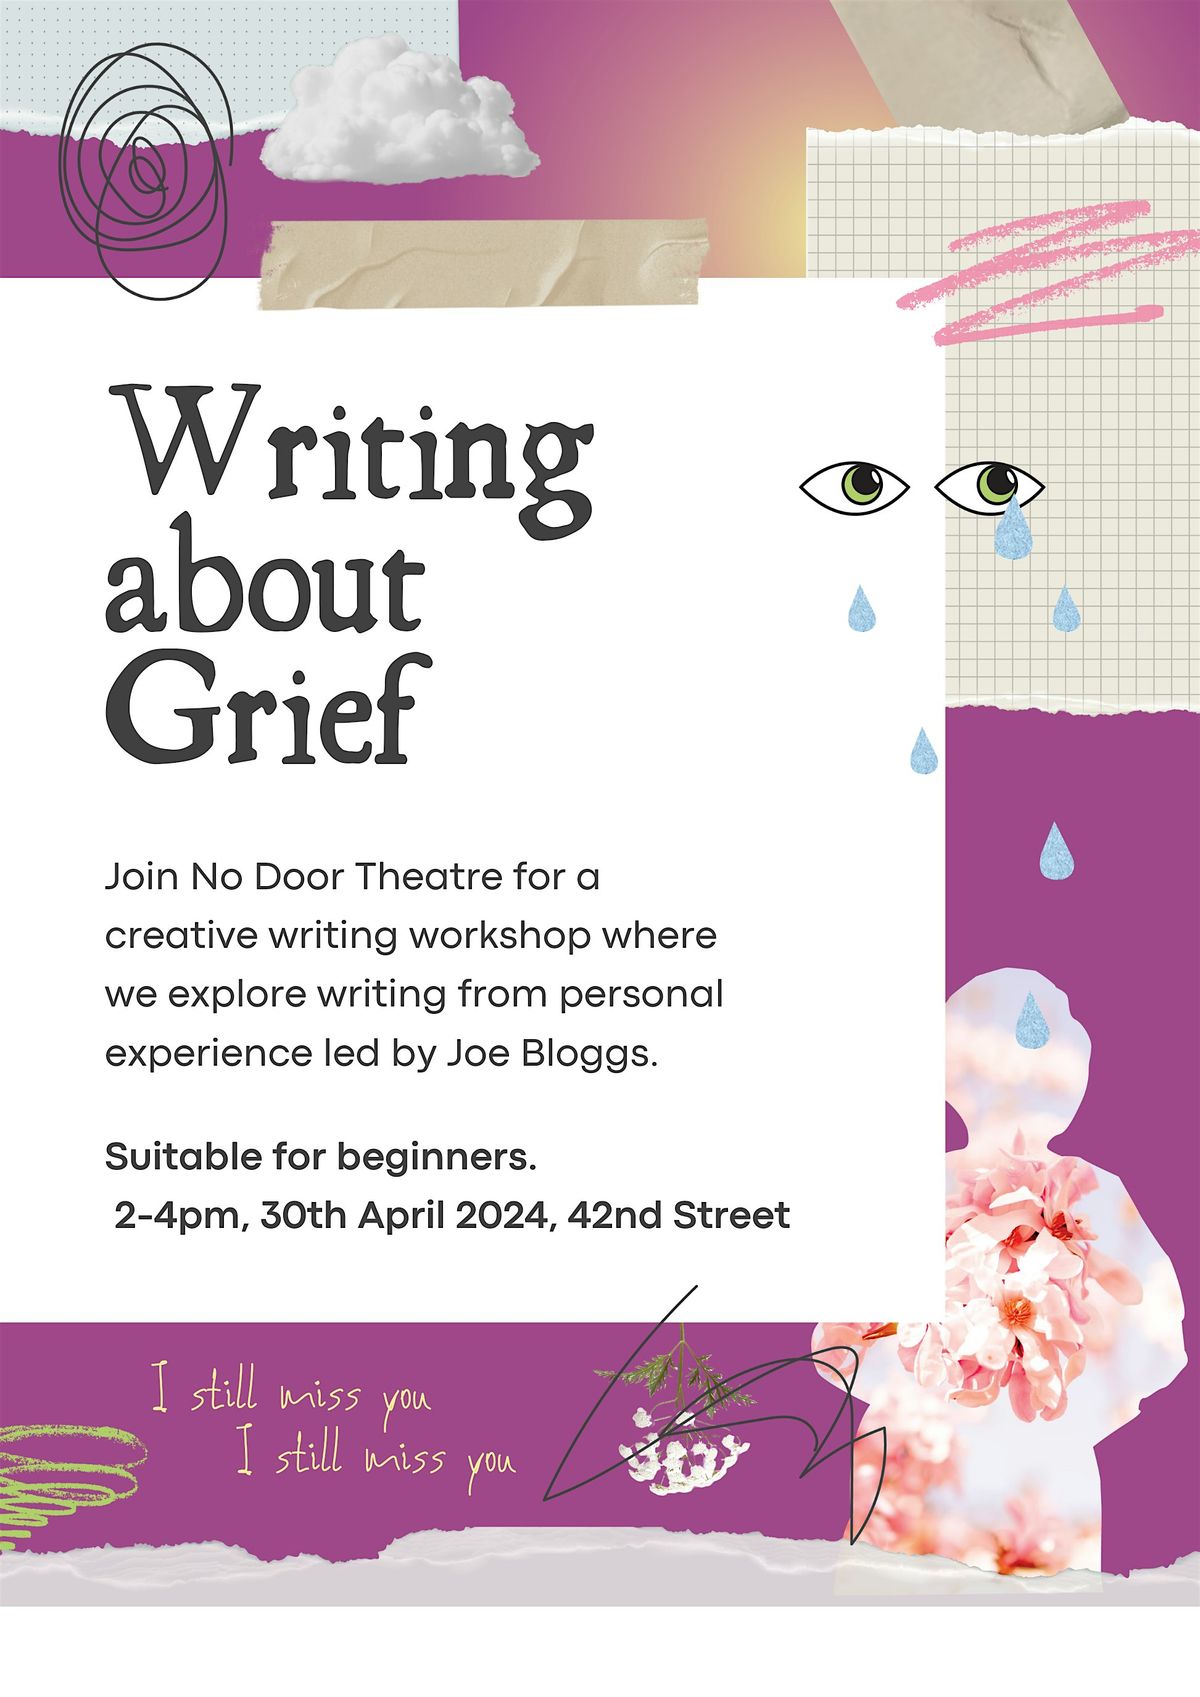 Writing about Grief @ Let's Talk About Loss Manchester